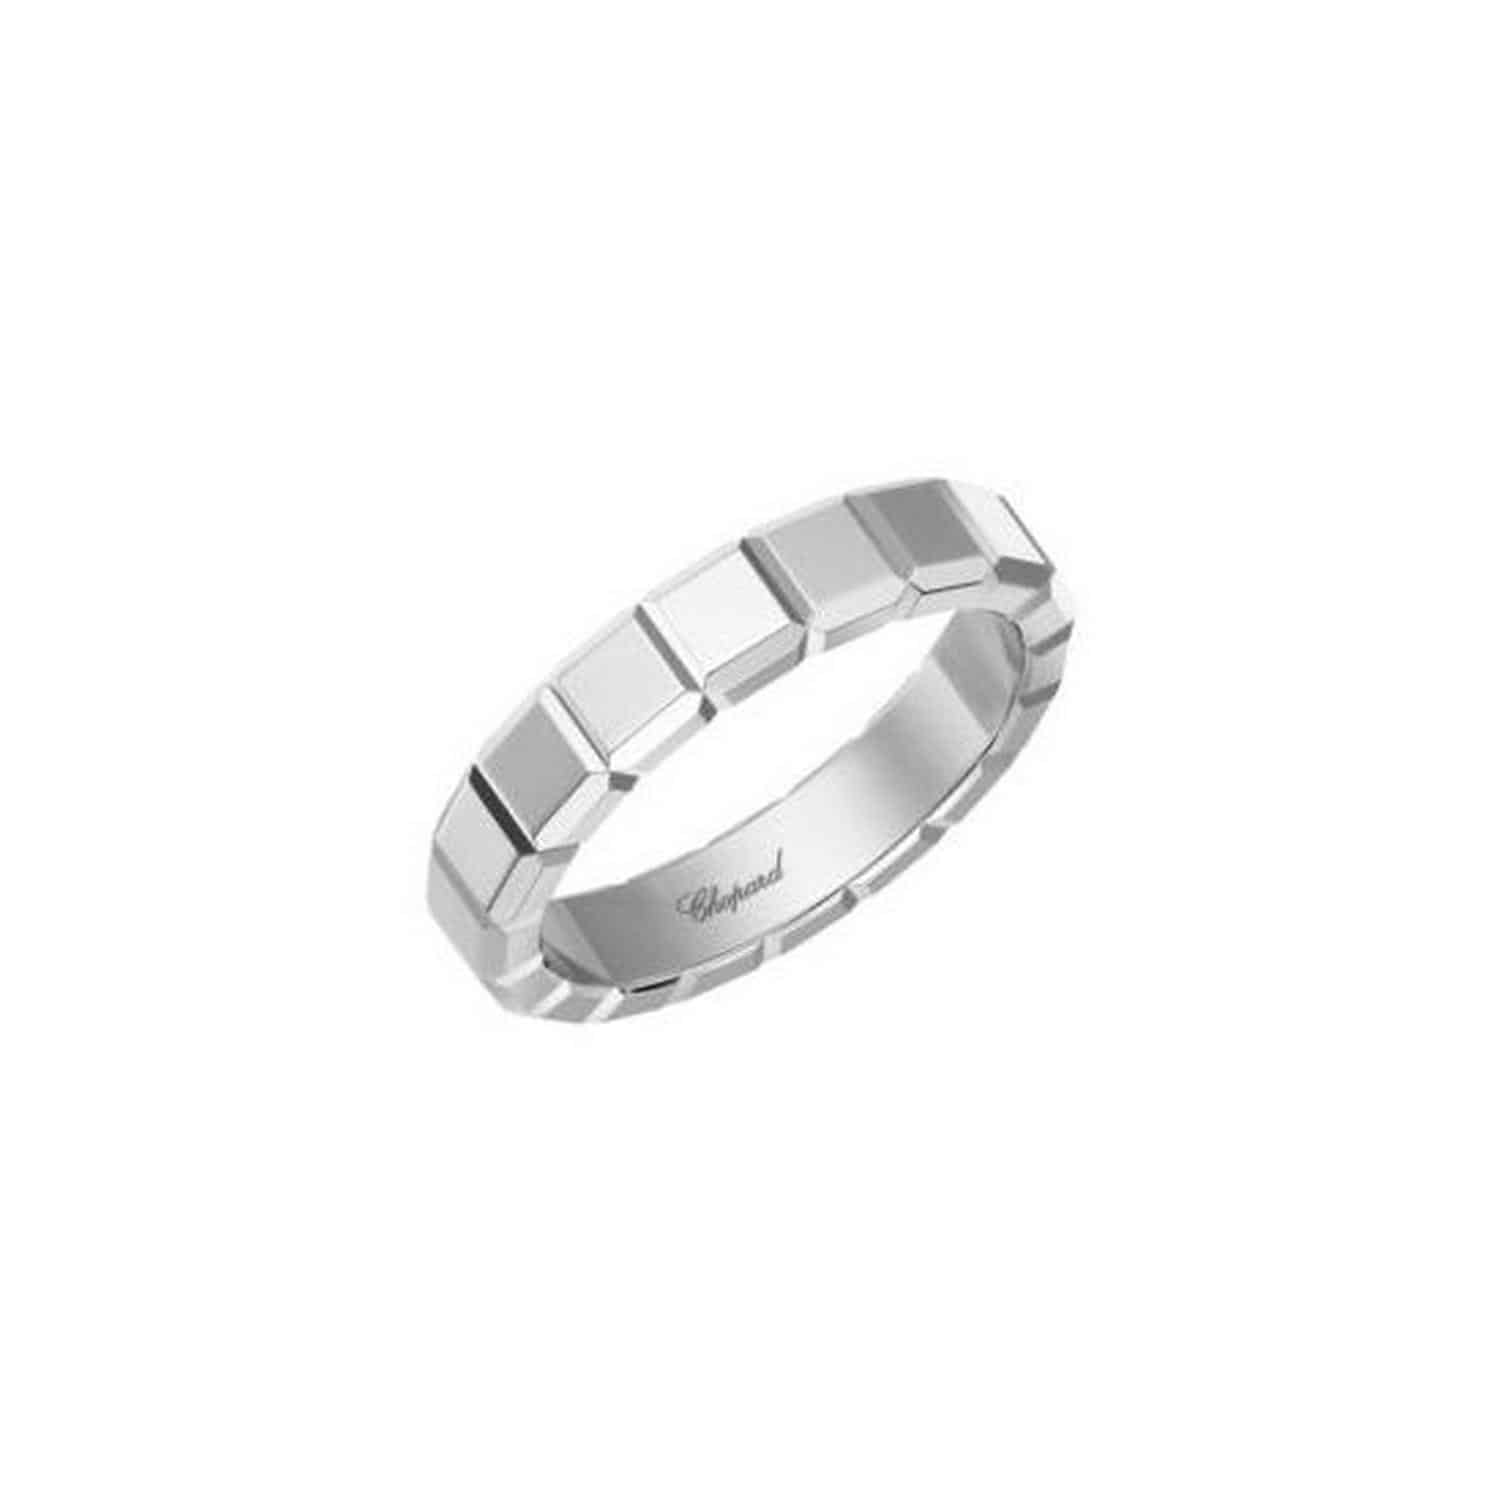 CHOPARD RING ICE CUBE - 829834-1012